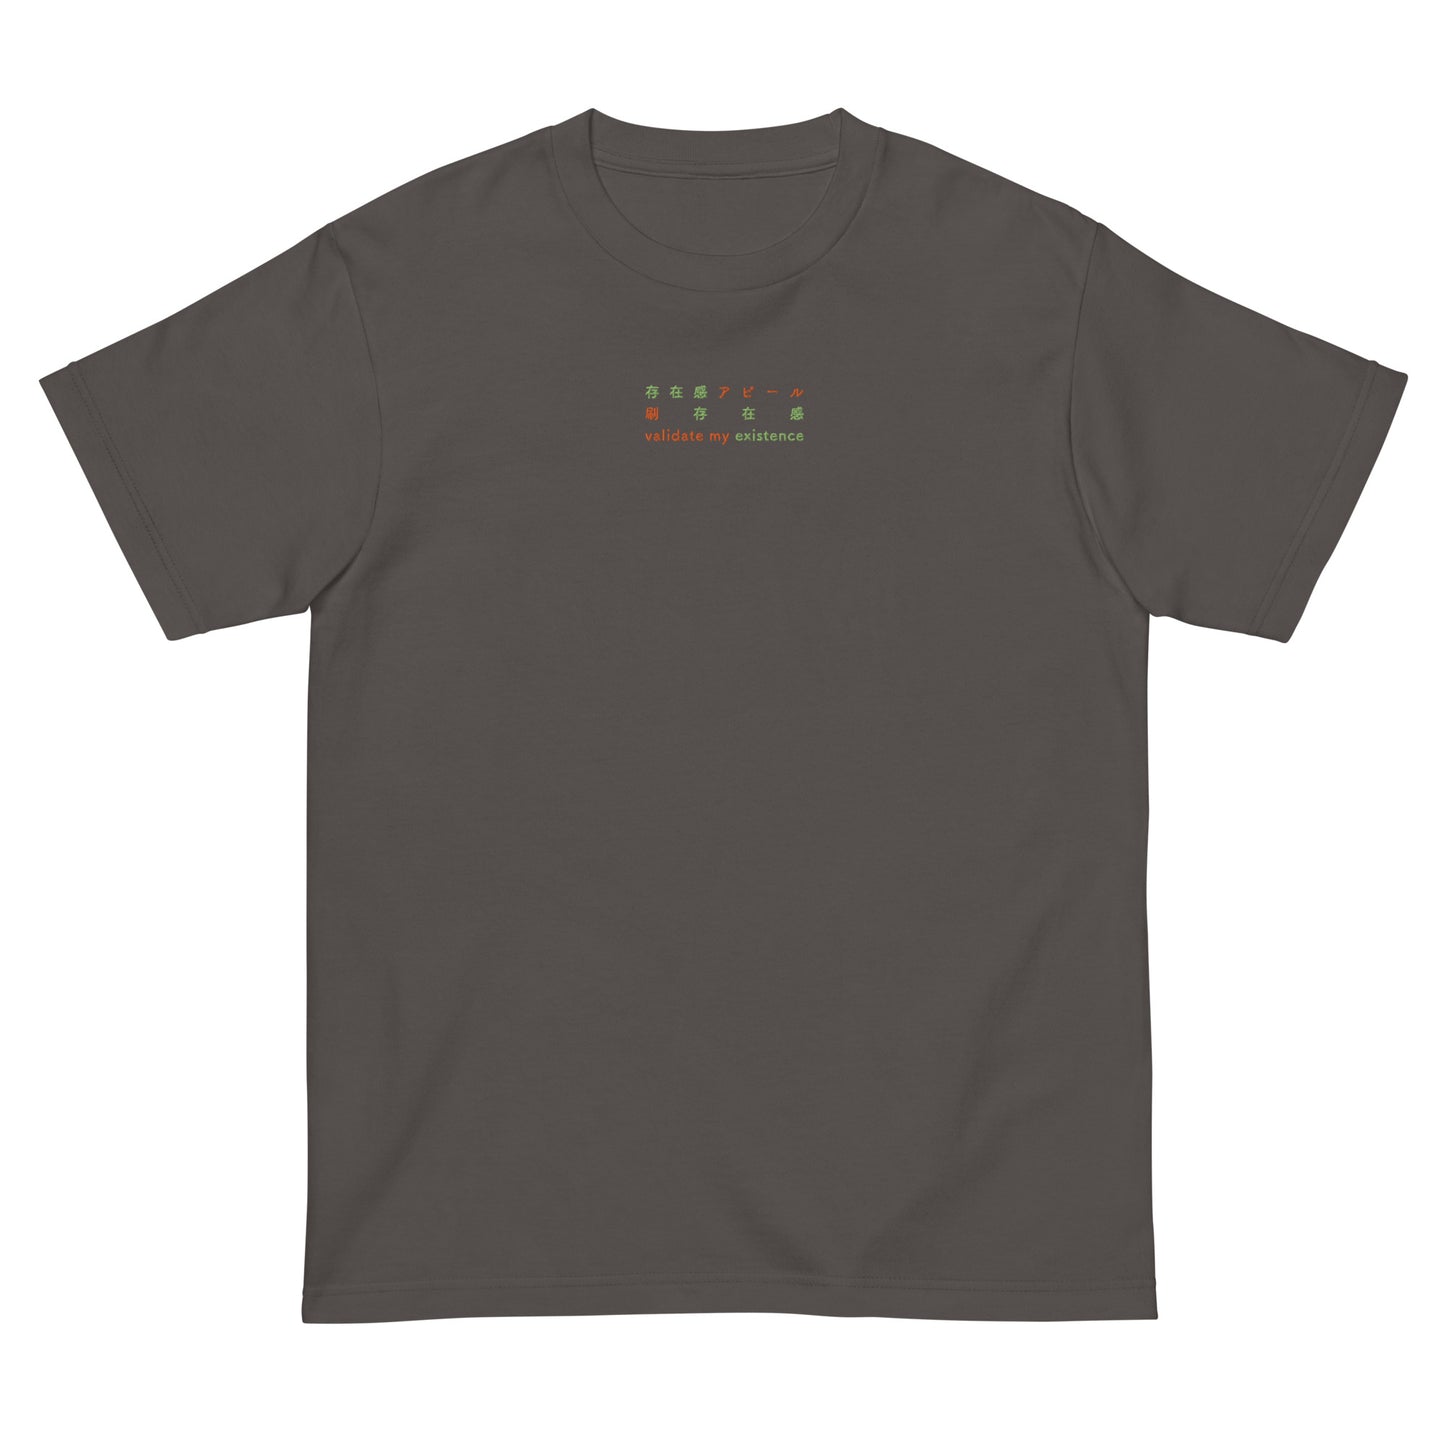 Dark Gray High Quality Tee - Front Design with an Orange,Green Embroidery "Validate my Existence" in Japanese,Chinese and English